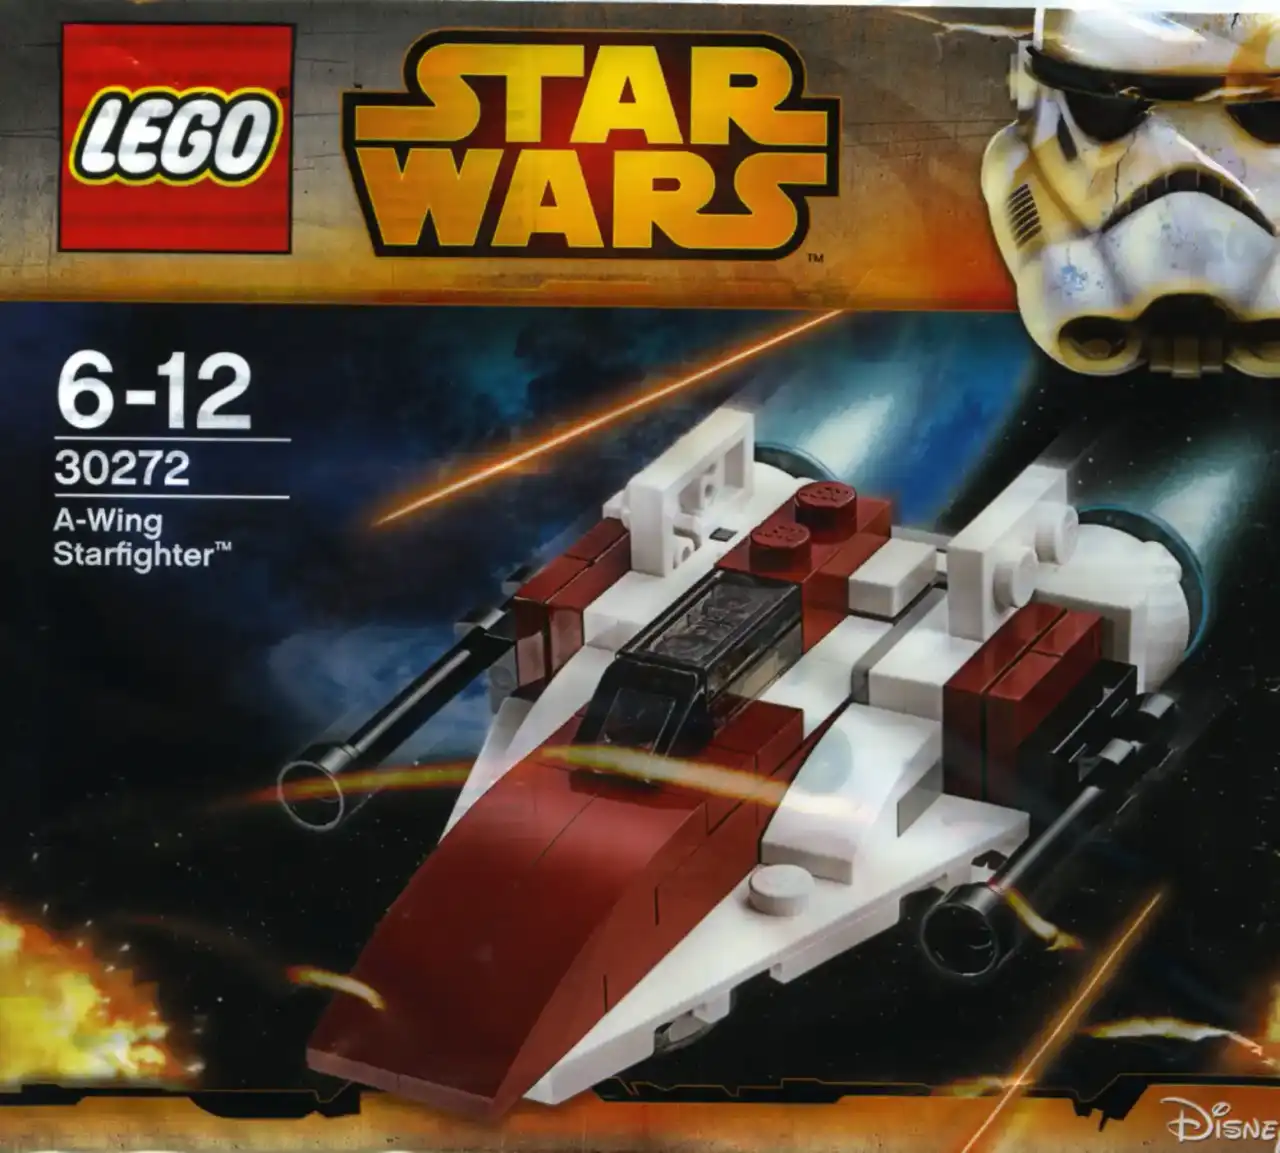 30272 - A-wing Starfighter